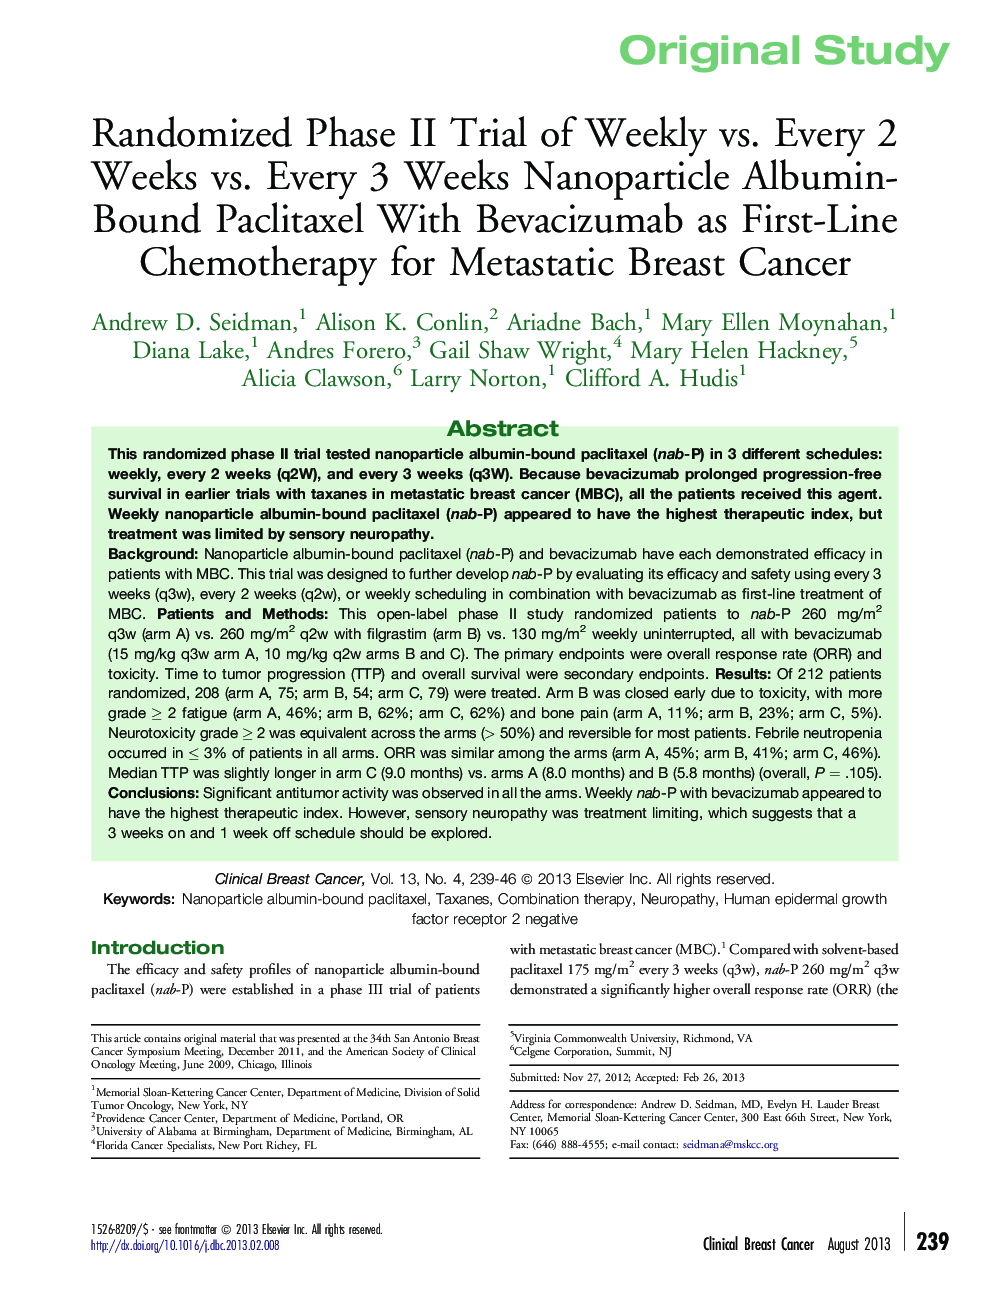 Randomized Phase II Trial of Weekly vs. Every 2 Weeks vs. Every 3 Weeks Nanoparticle Albumin-Bound Paclitaxel With Bevacizumab as First-Line Chemotherapy for Metastatic Breast Cancer